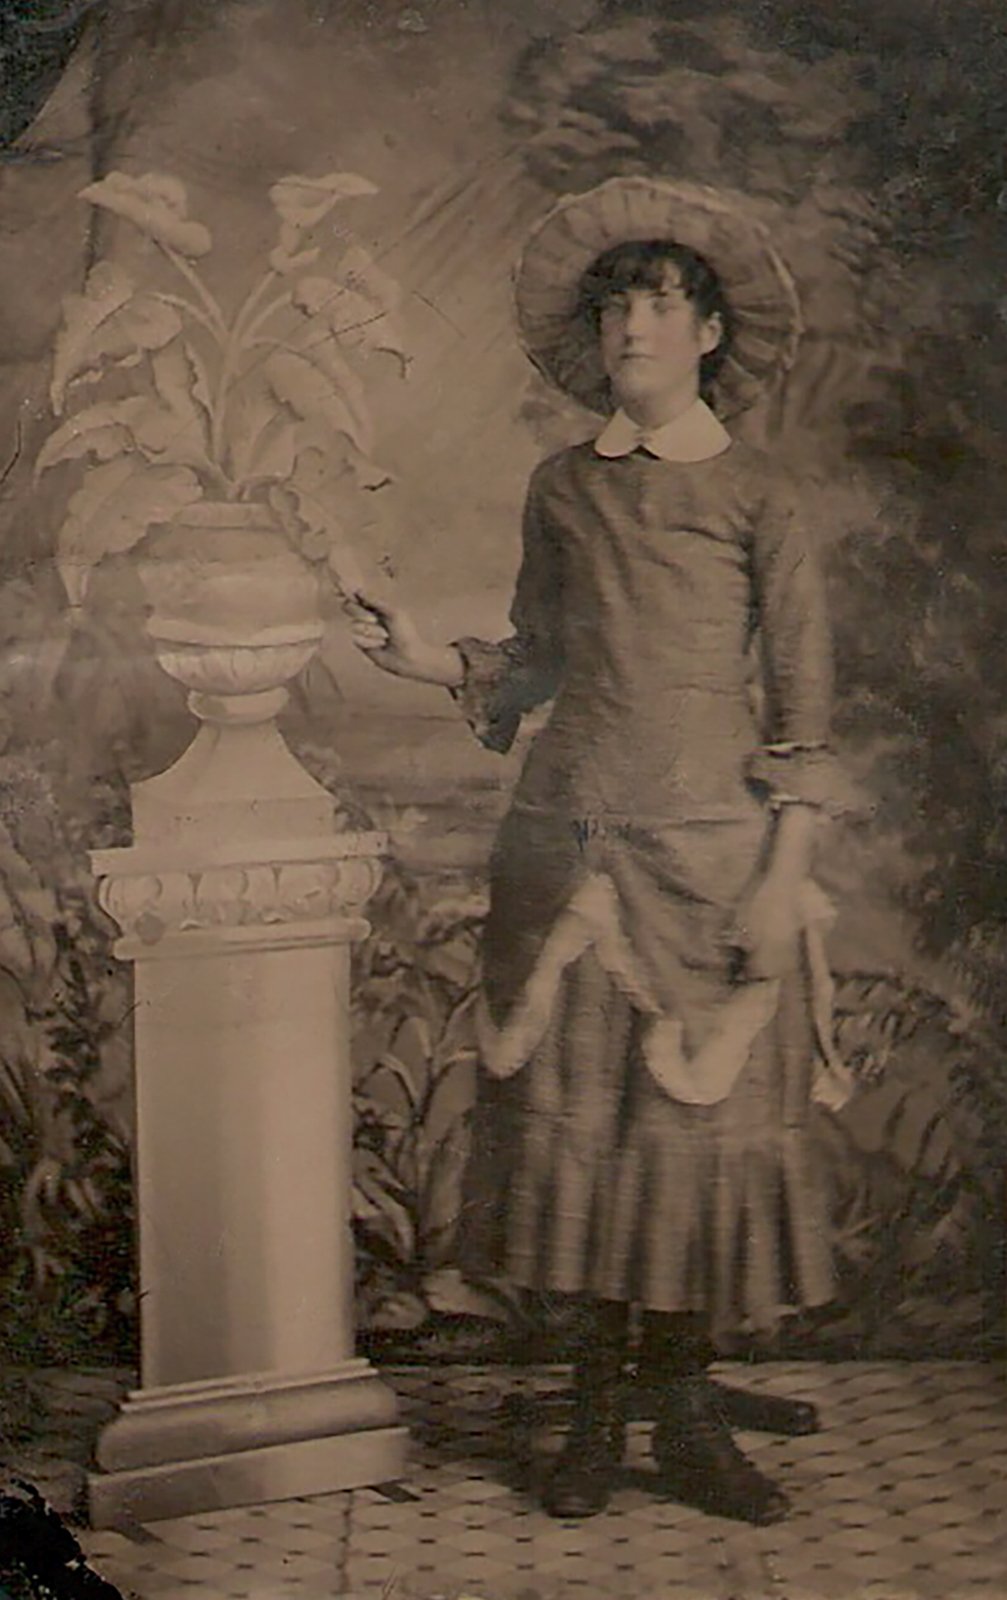 A photo of Elizabeth O'Brien produced on tin. Taken in 1887 when she was 16 years old.